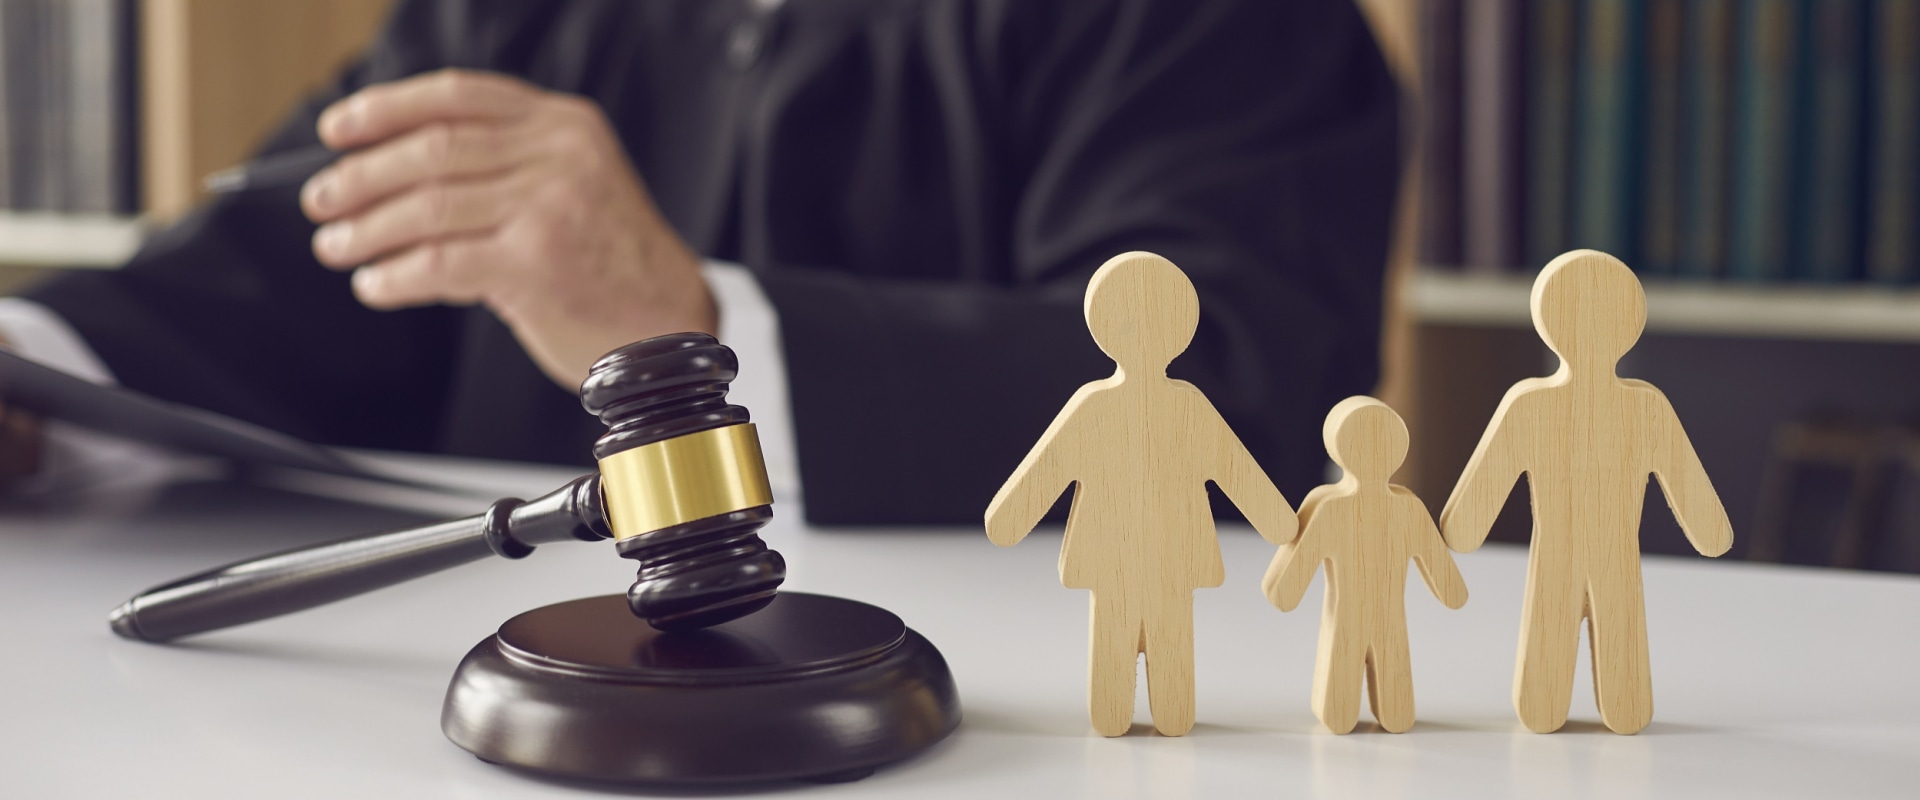 Can i forgive child support arrears in florida?